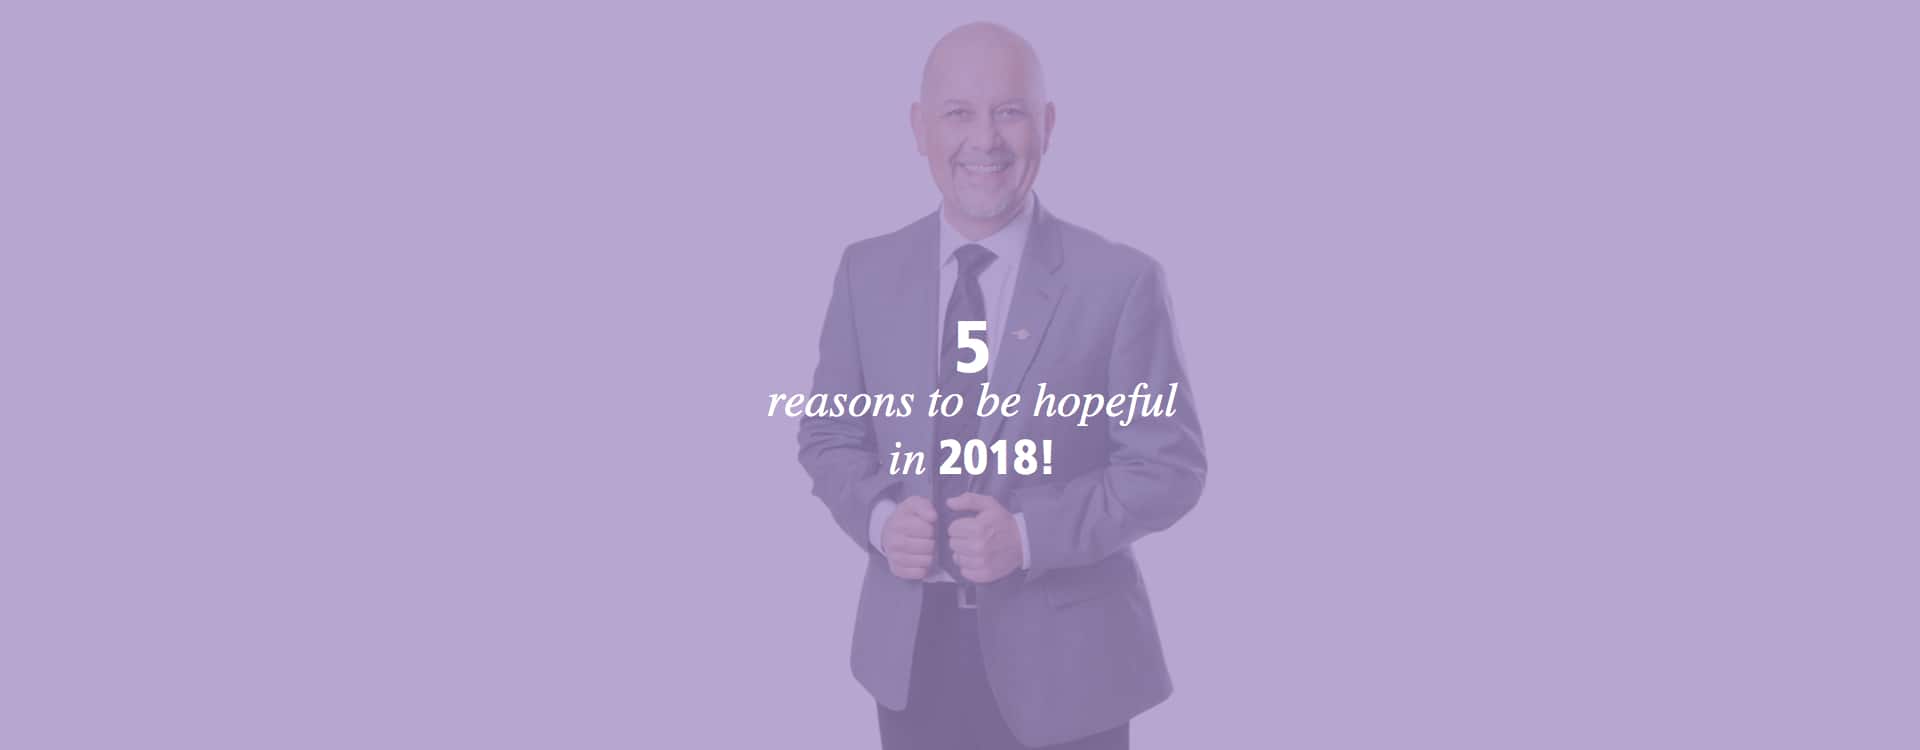 5 reasons to be hopeful for 2018